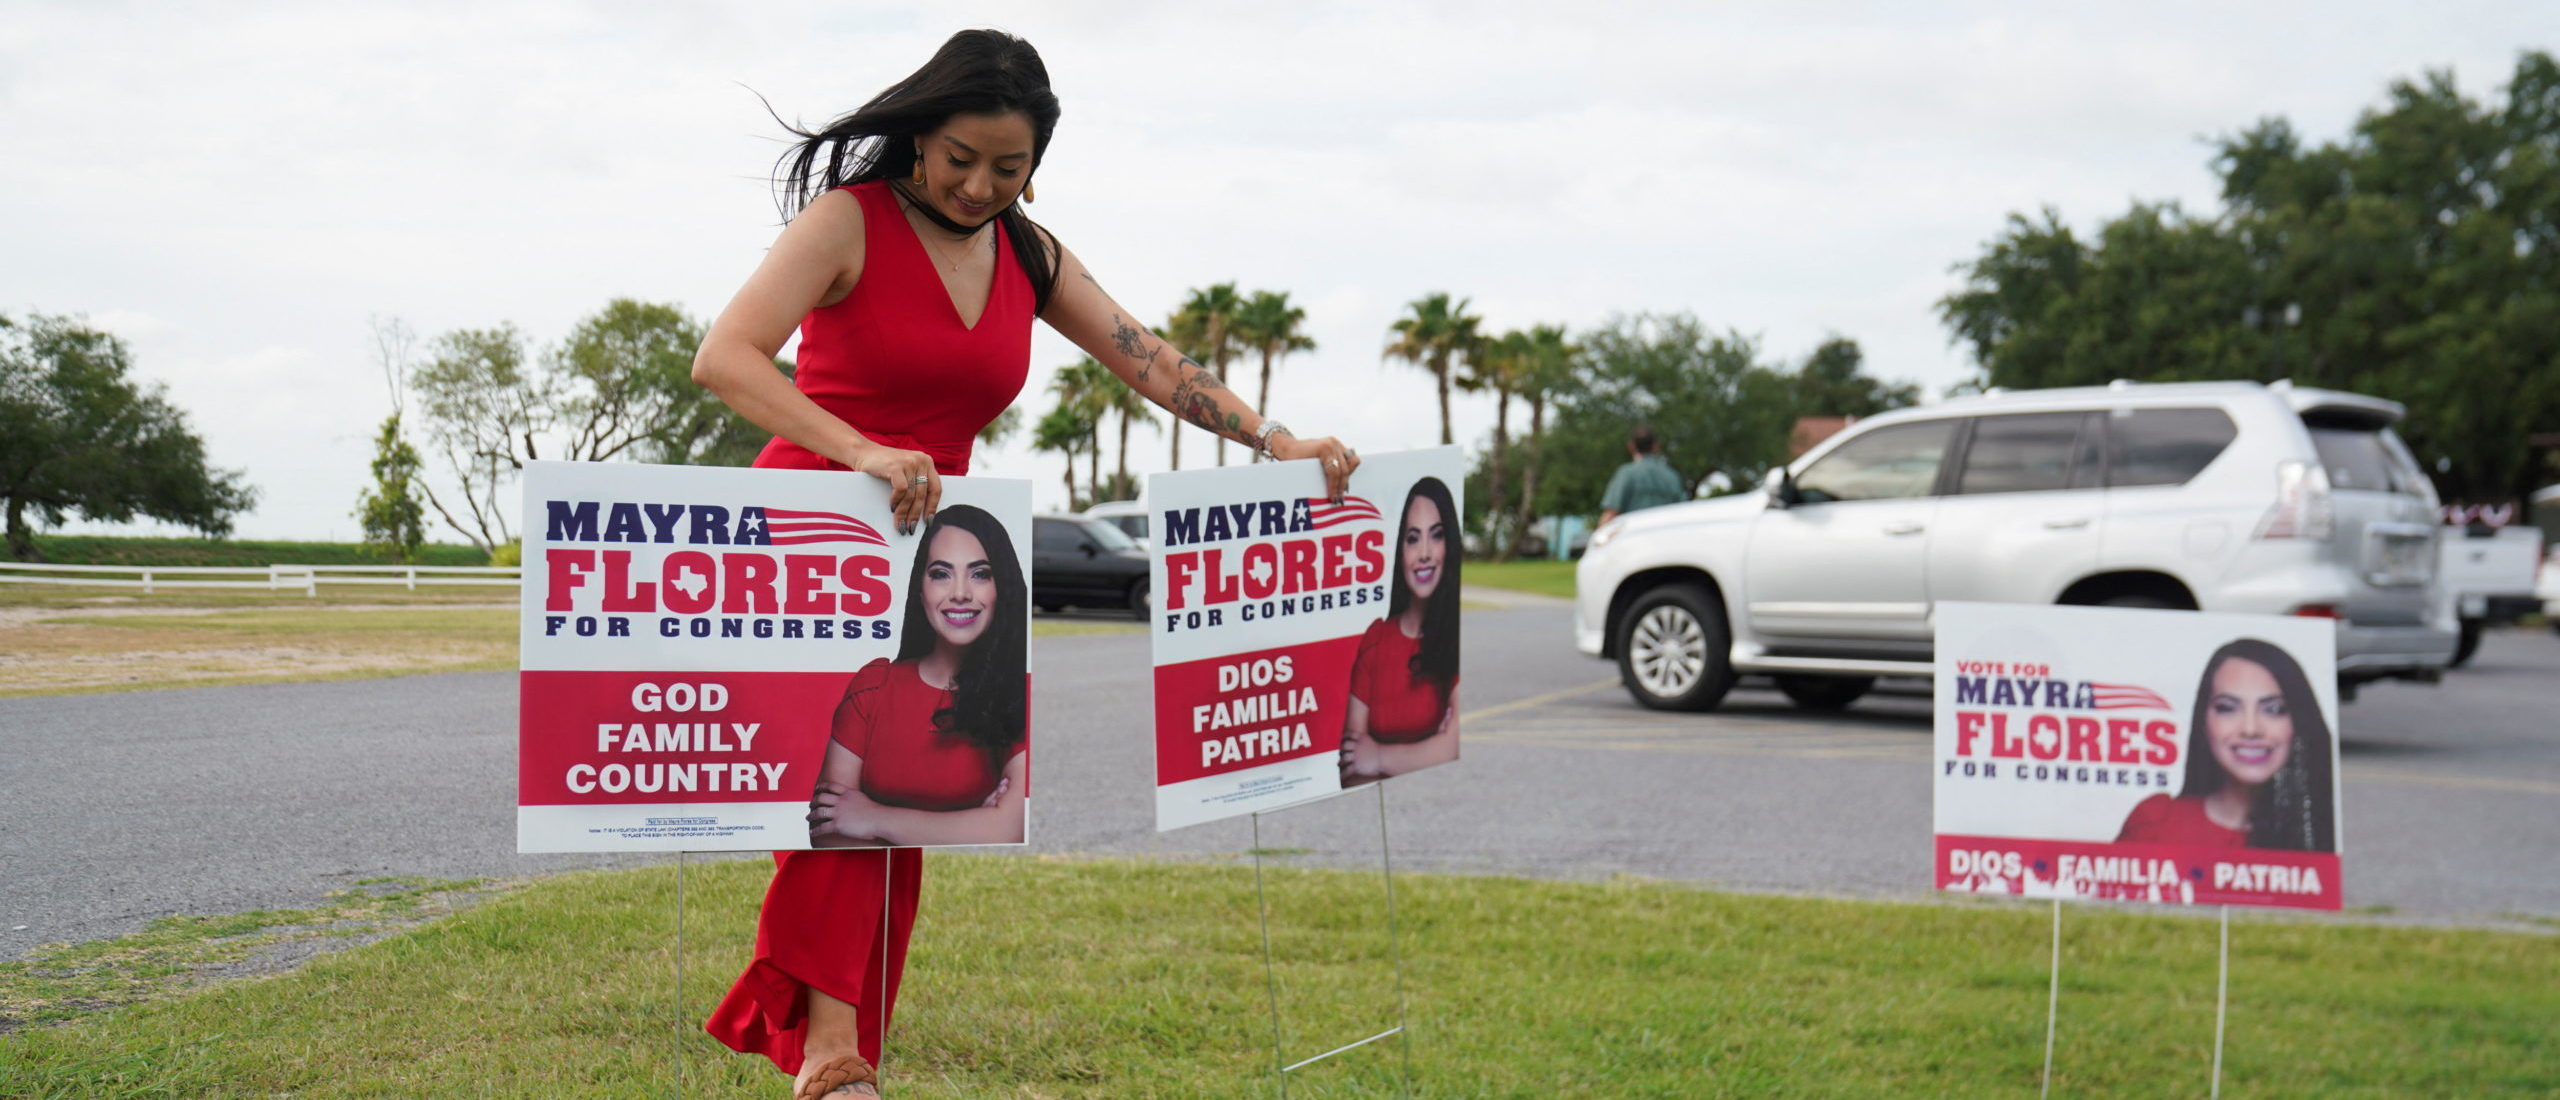 Sabrina Cantu, volunteer coordinator for Mayra Flores, a Republican candidate who is running for the vacant 34th congressional district seat, puts up signs outside their watch party event in San Benito, Texas, U.S., June 14, 2022. REUTERS/Veronica G. Cardenas